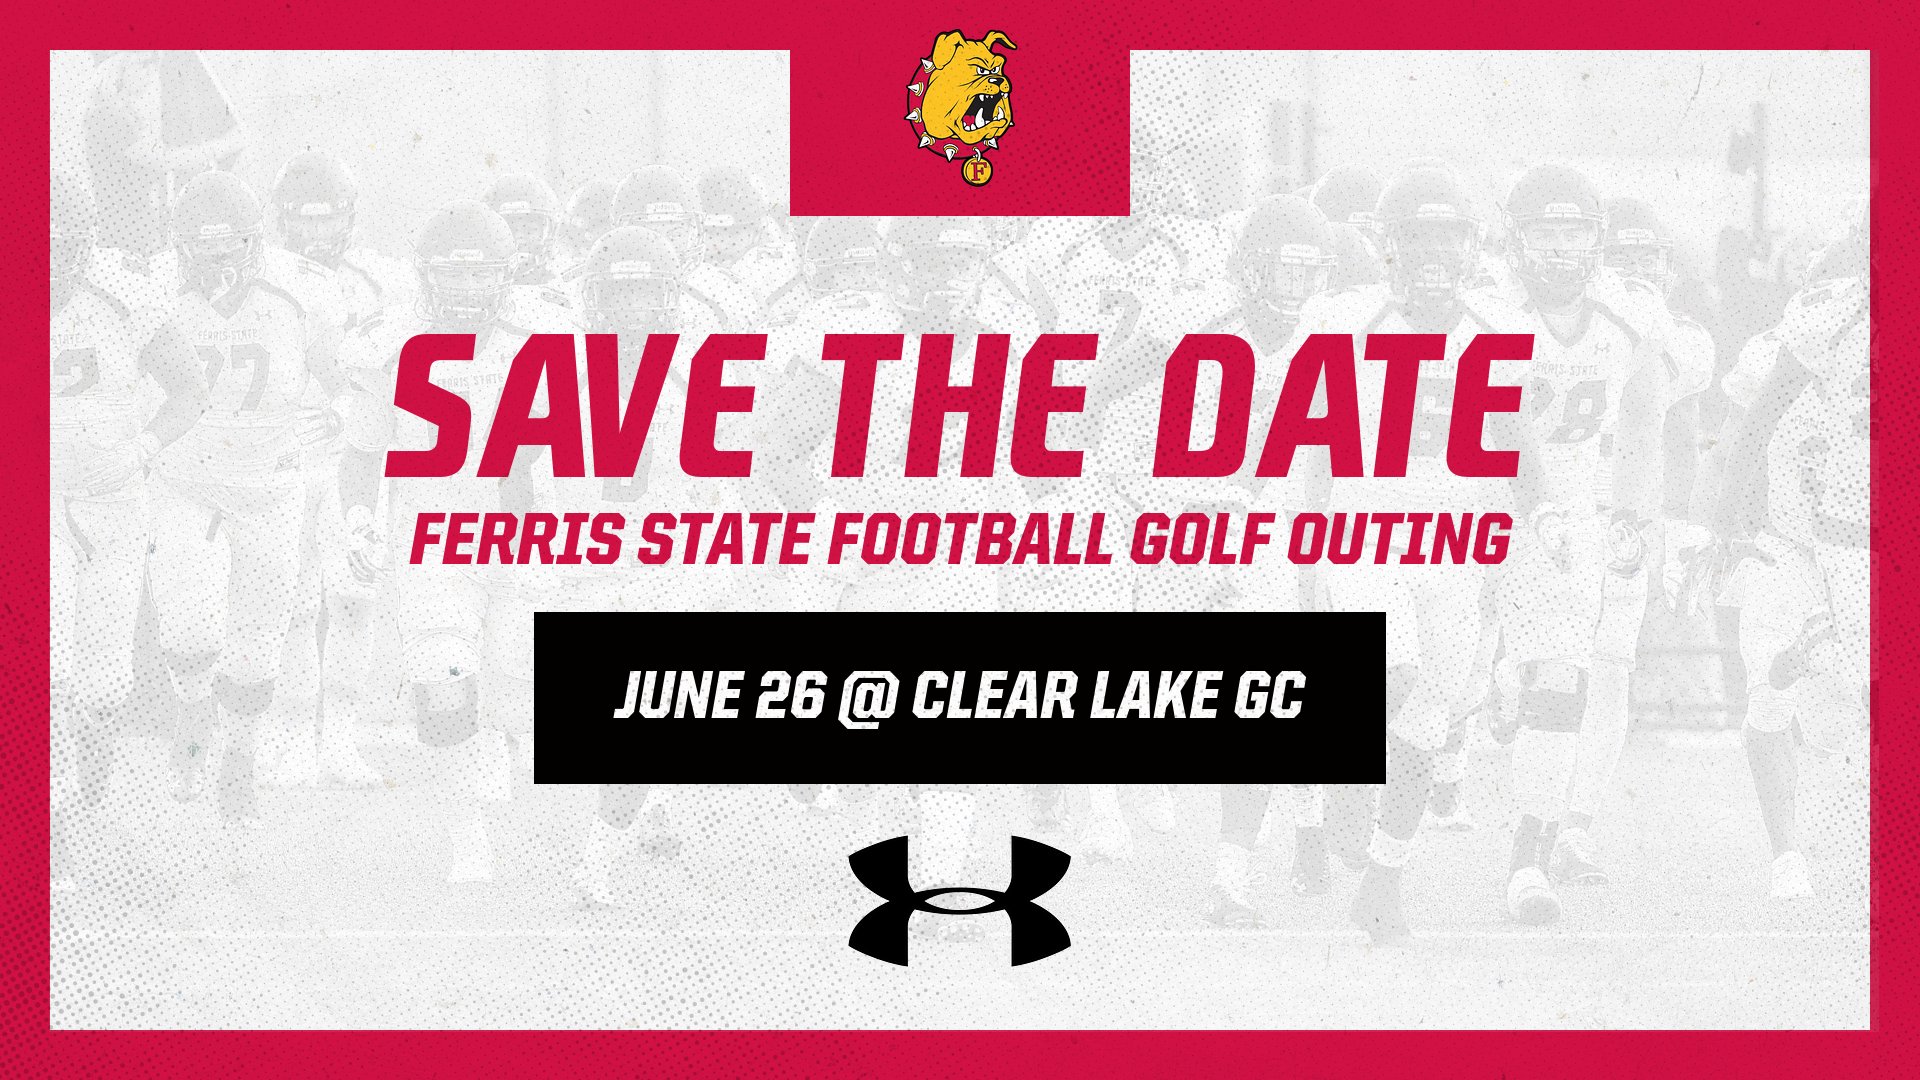 SAVE THE DATE - Ferris State Football Golf Outing June 26 at Clear Lake Golf Club